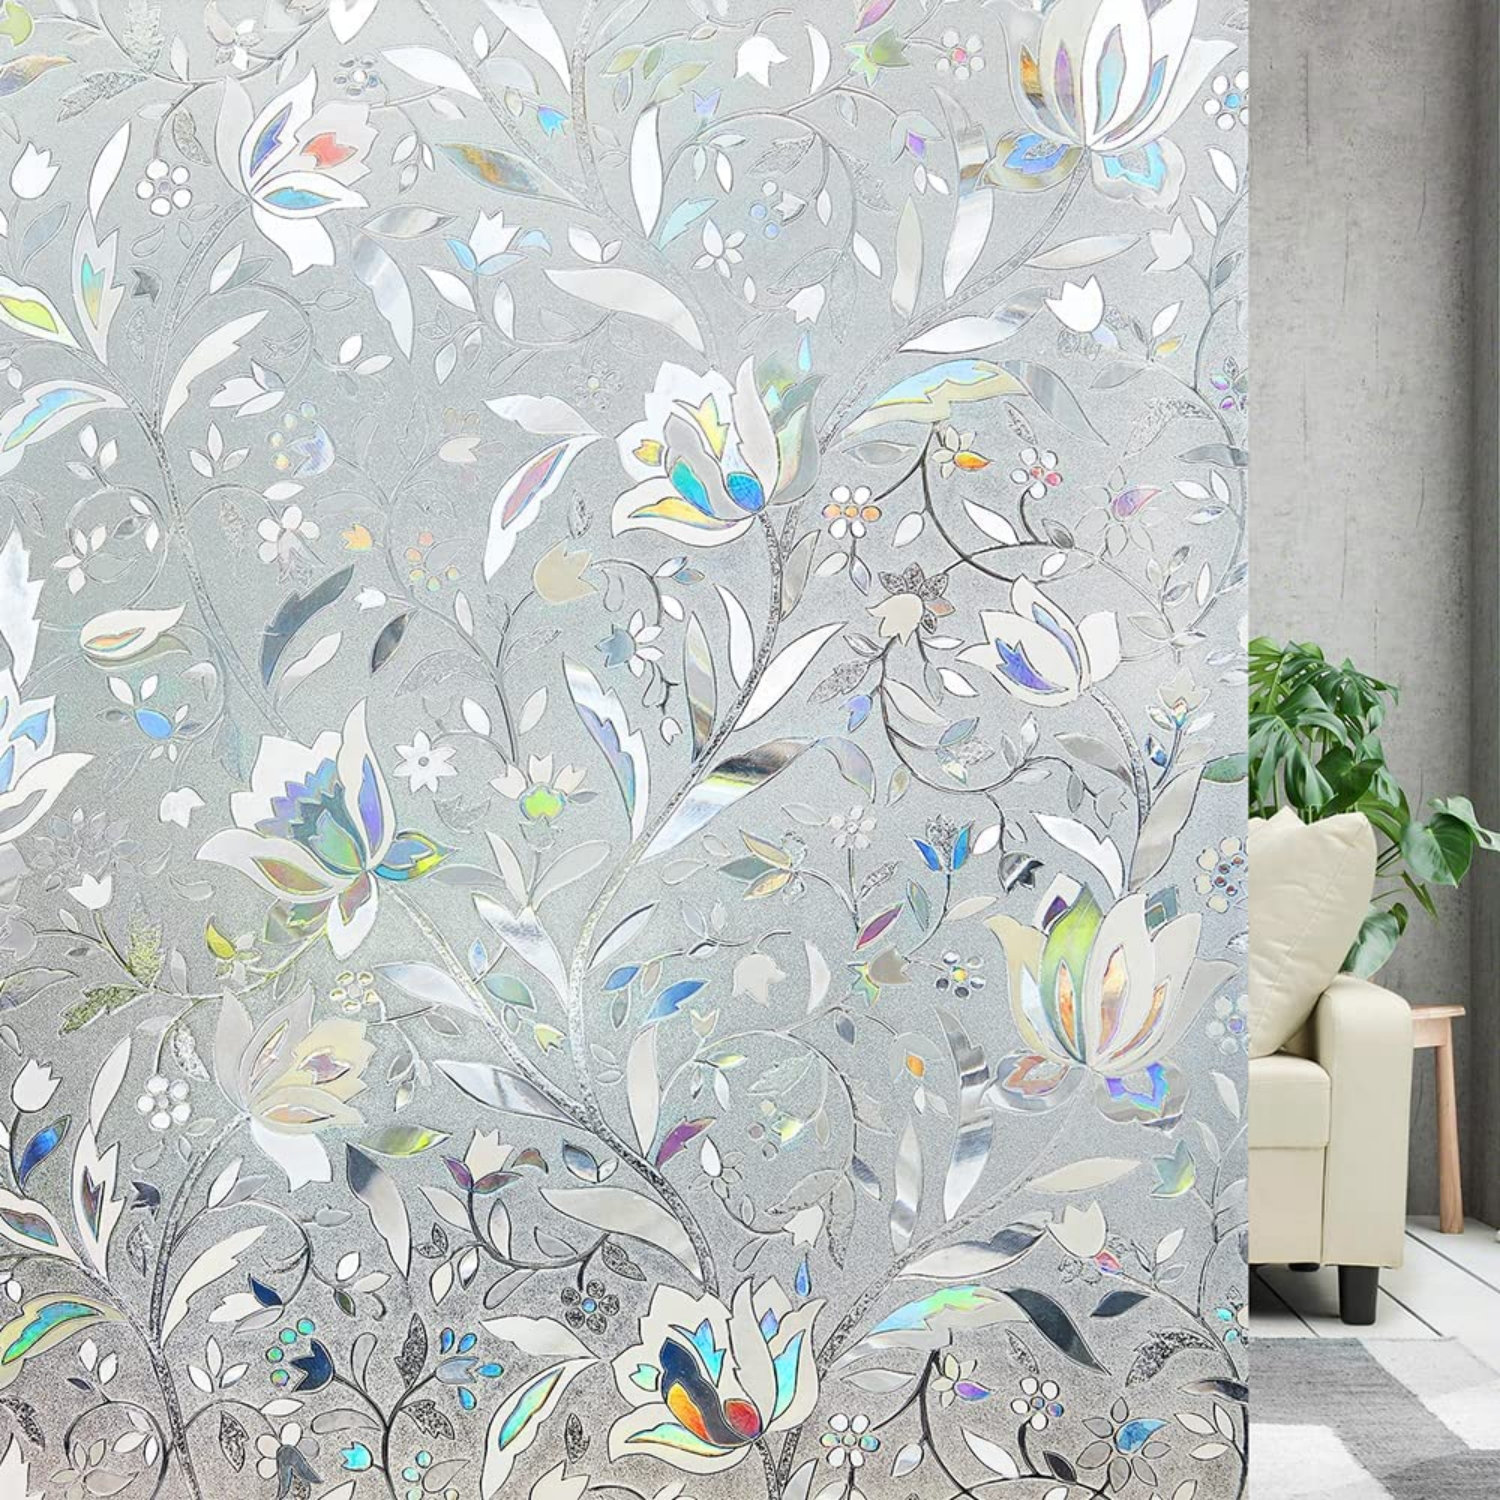 80 Piece Decorative Resin Stickers Clear Stickers - Decals